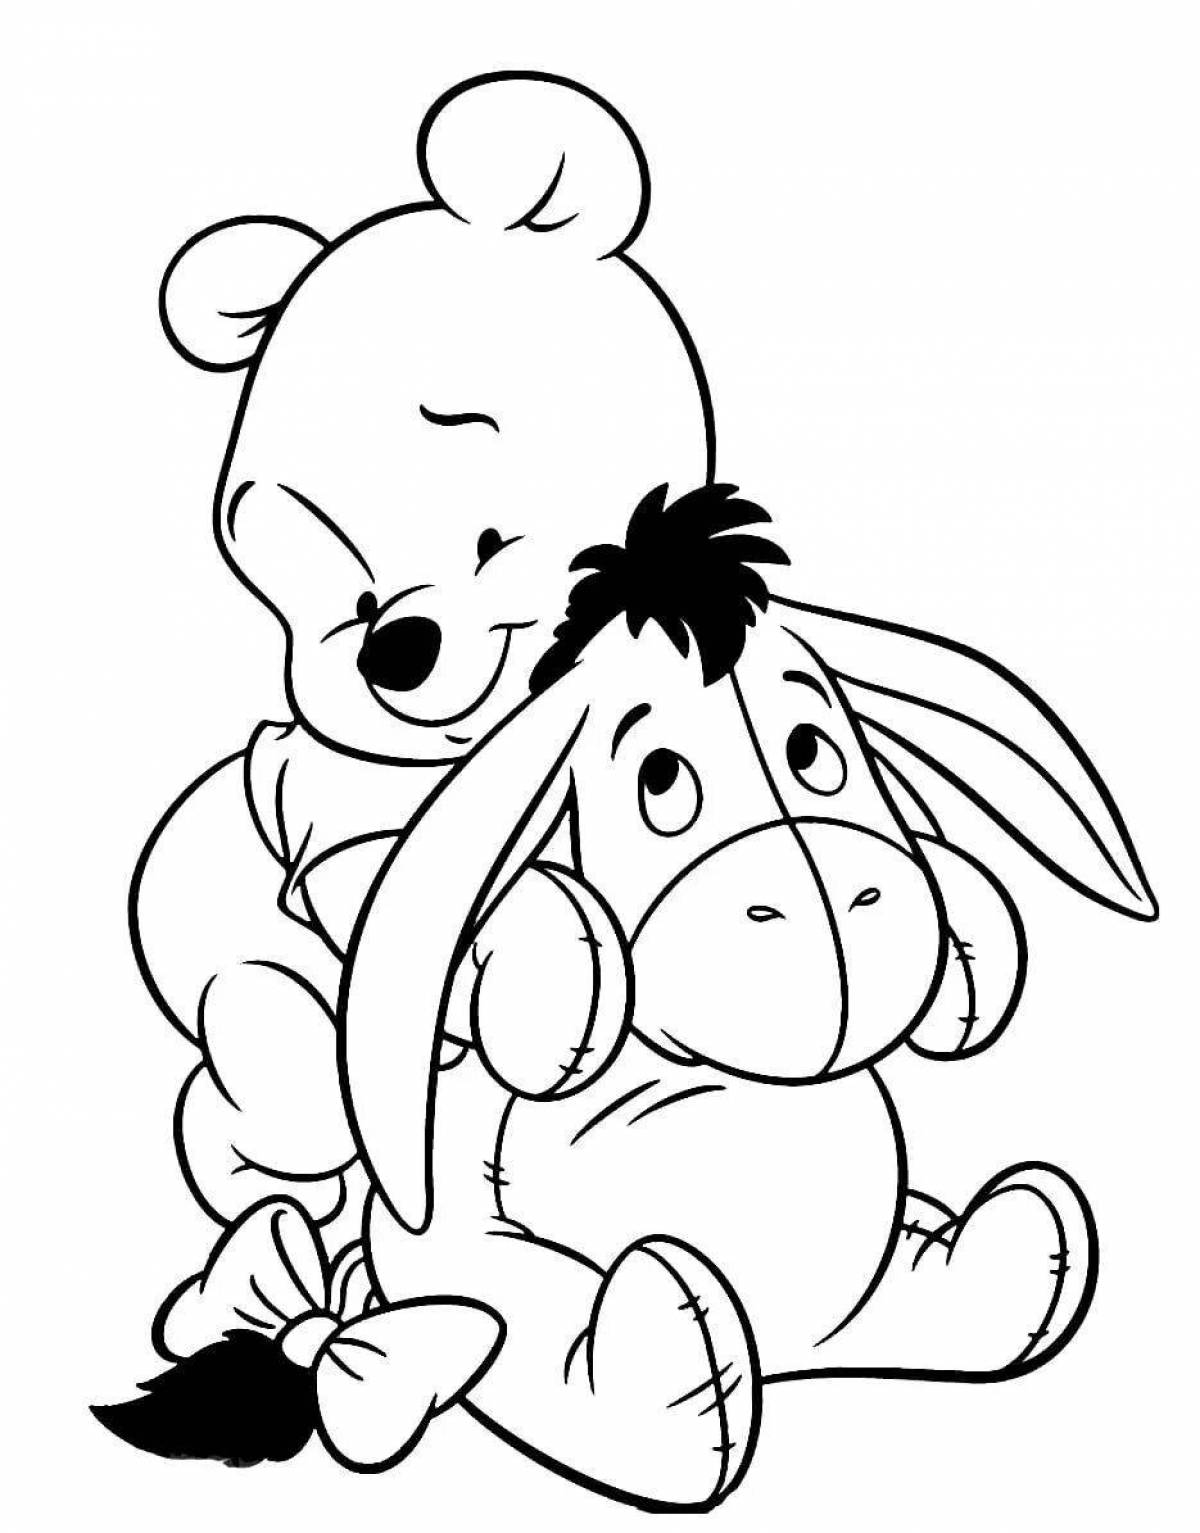 Coloring page shiny winnie the pooh and his friends